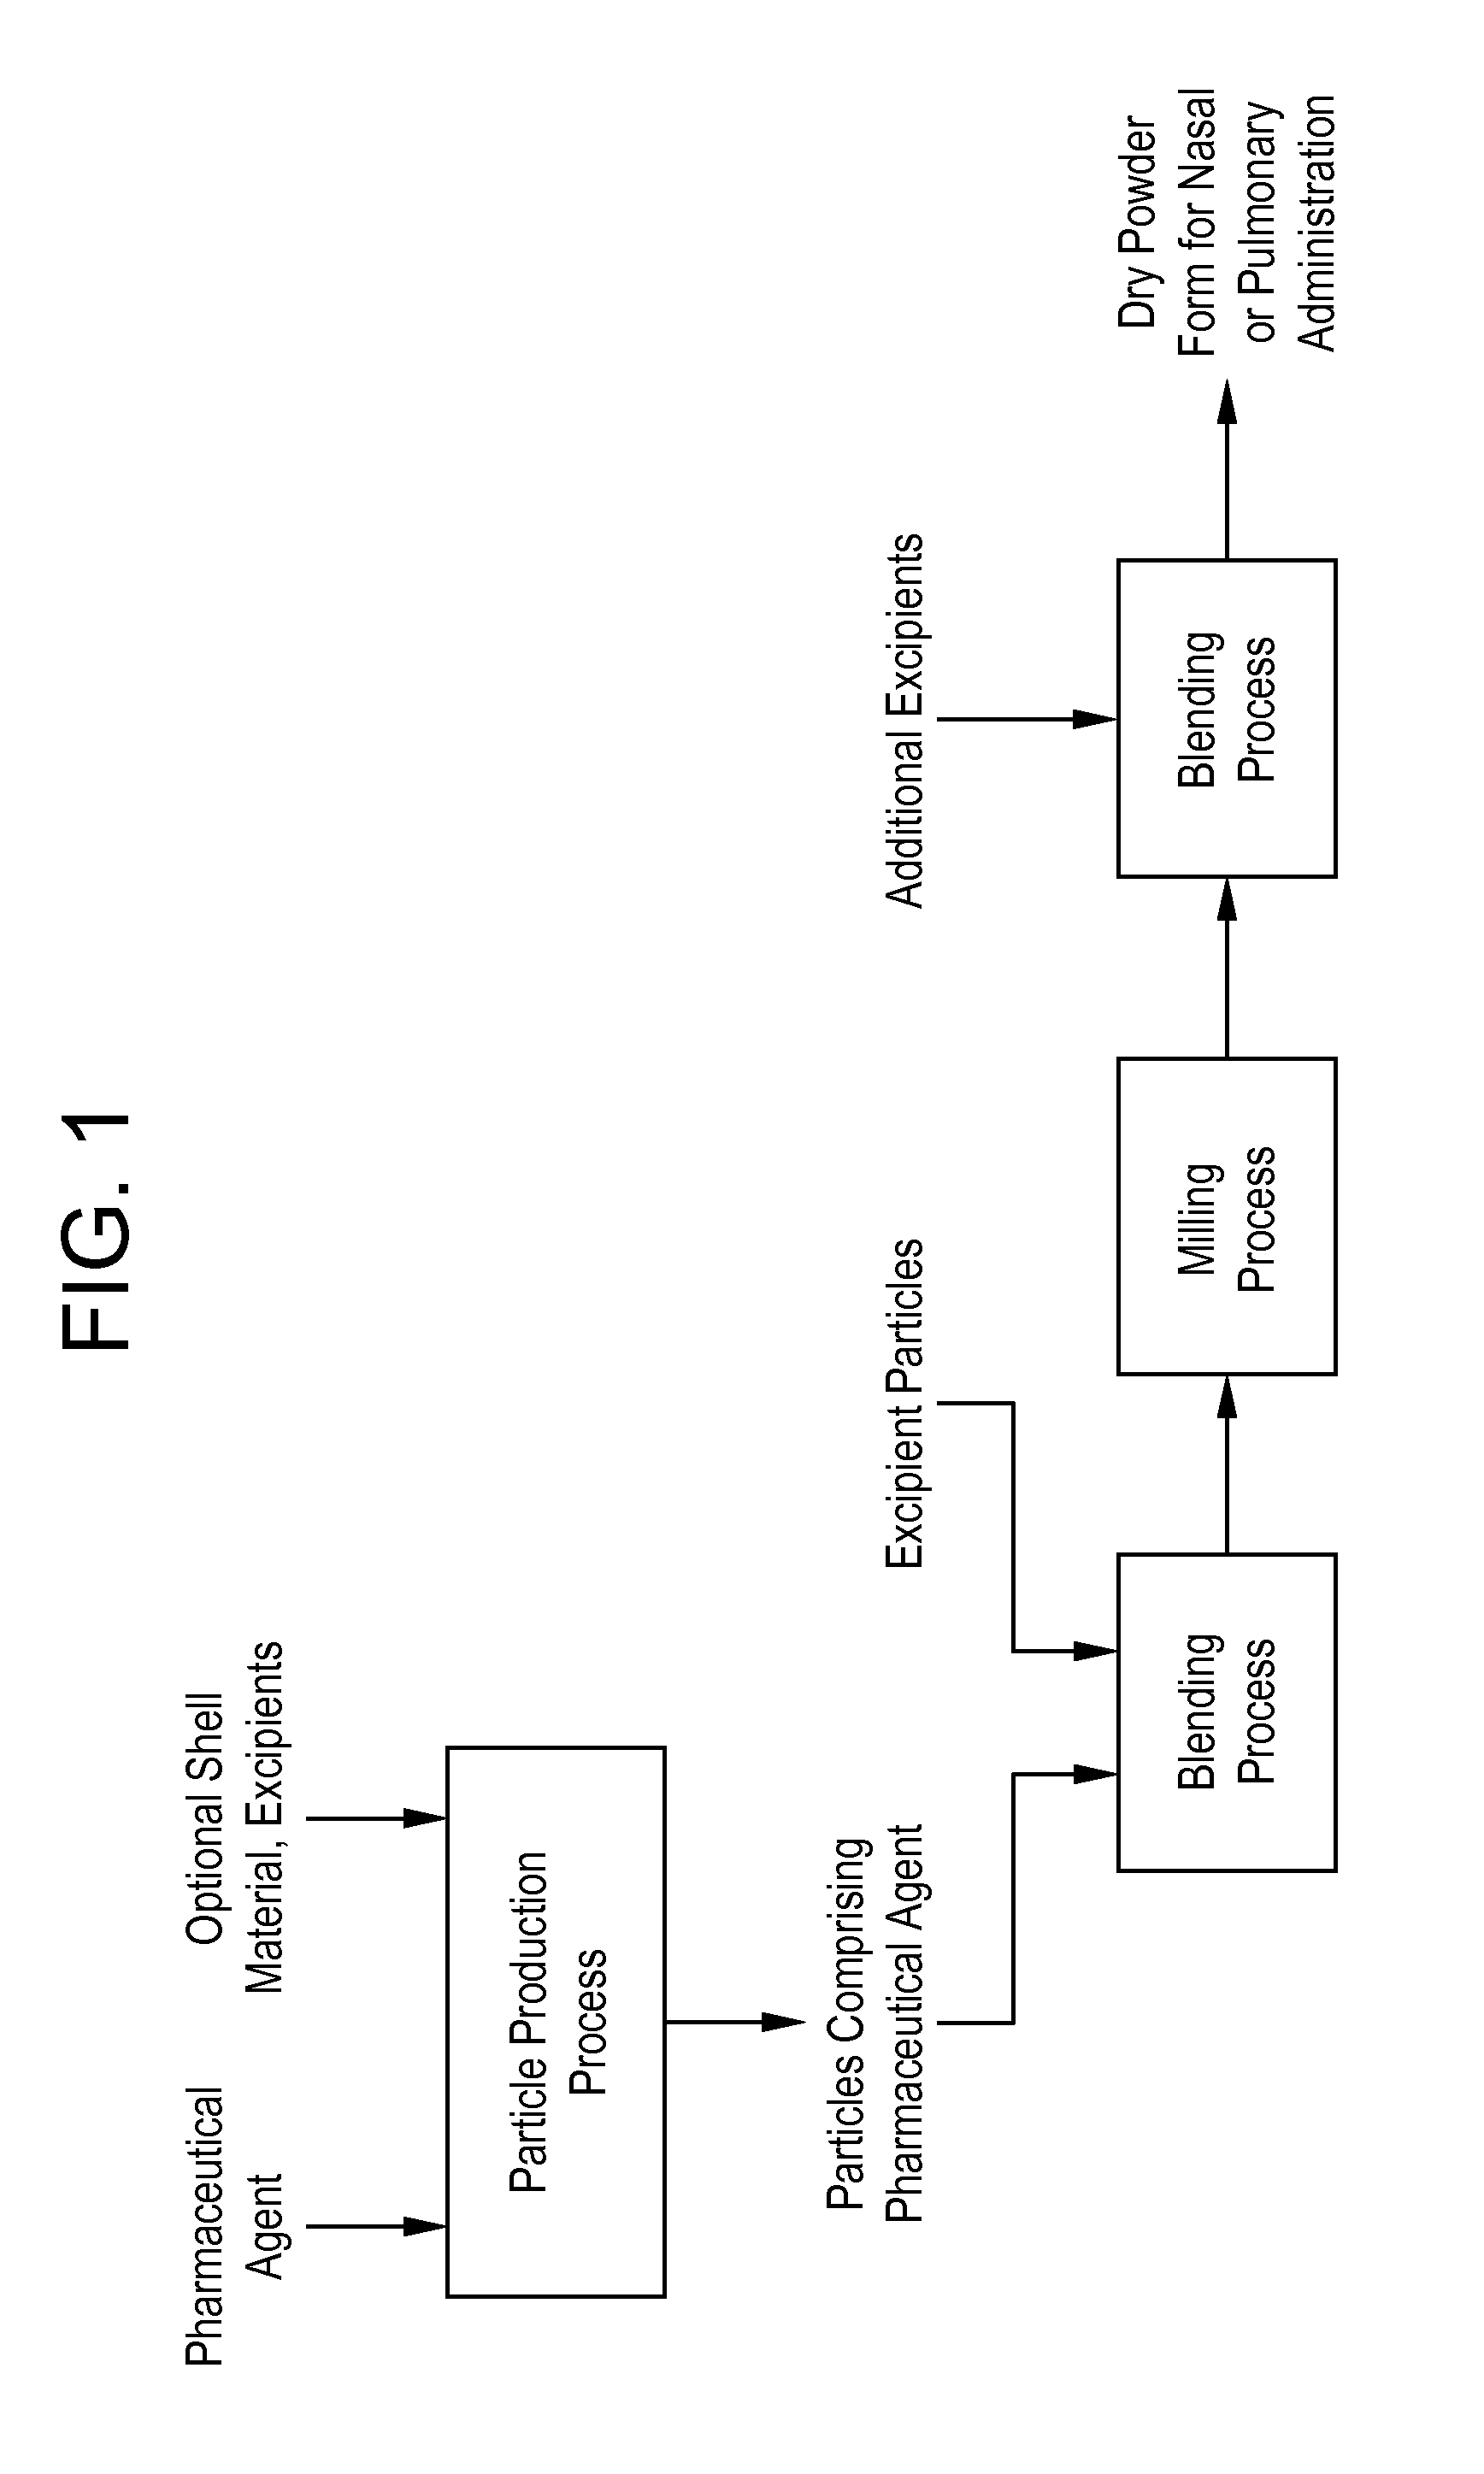 Processes for making particle-based pharmaceutical formulations for pulmonary or nasal administration